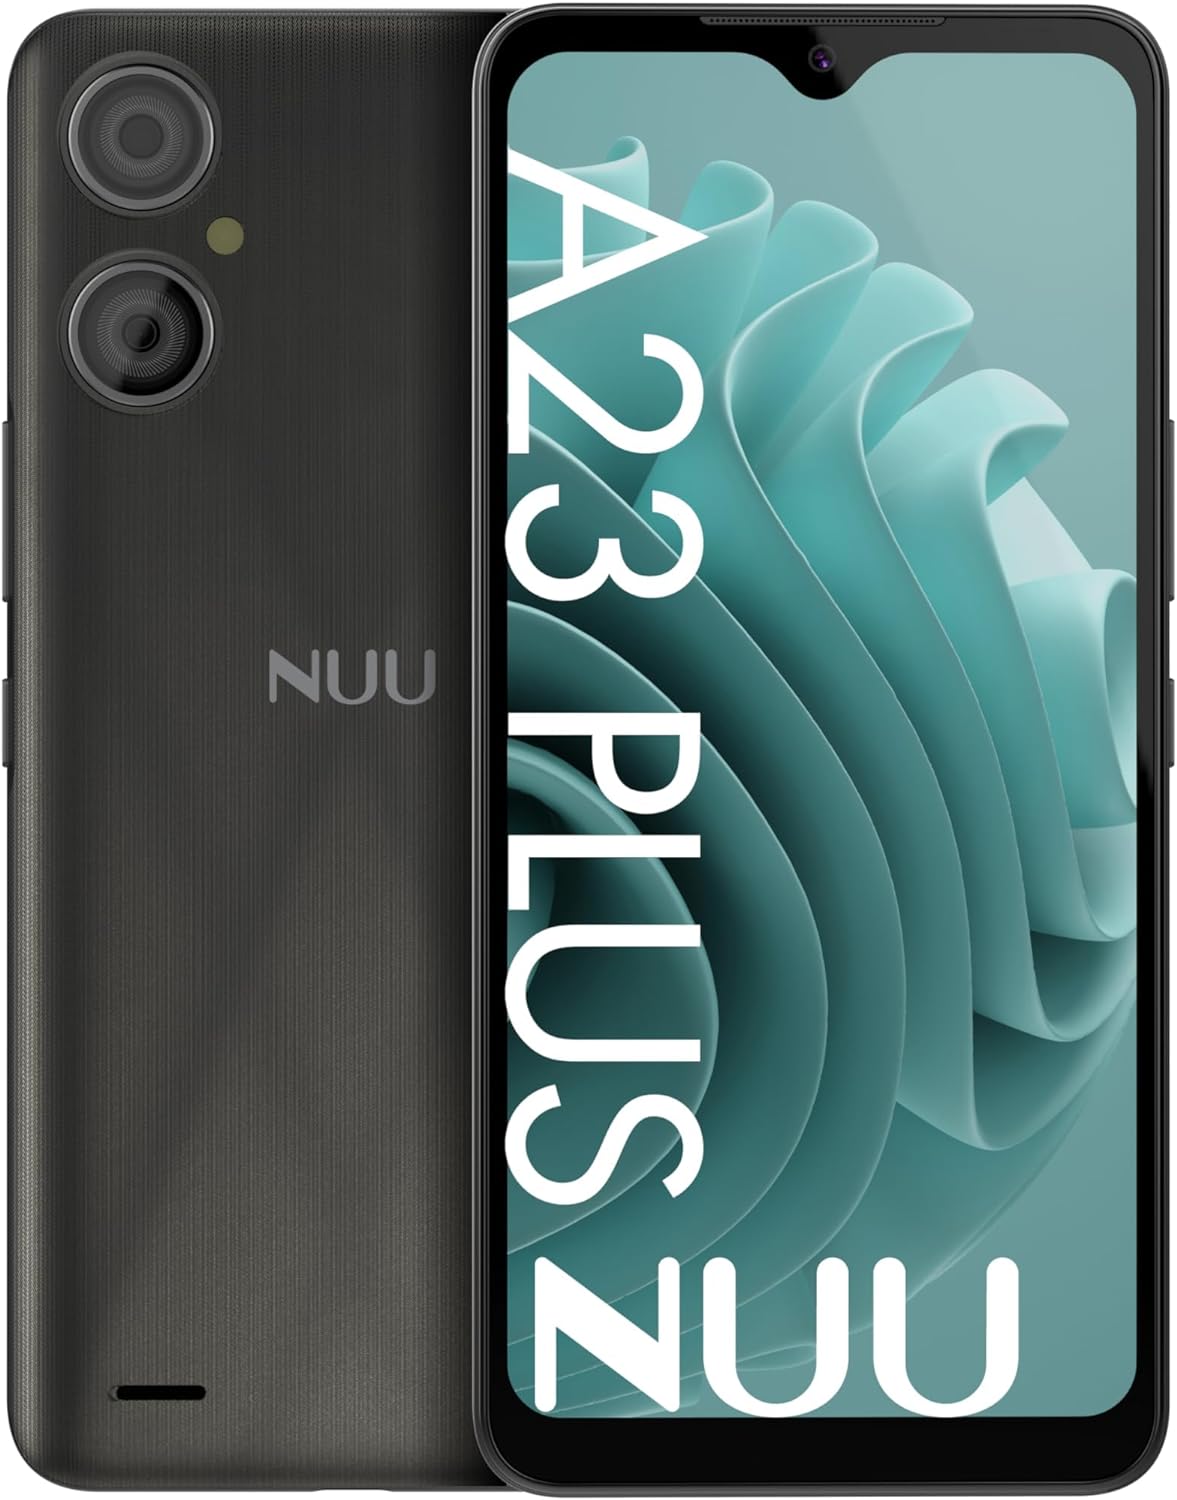 NUU A23Plus Basic Cell Phone for AT&T, T-Mobile, Cricket, Mint Mobile, Metro, 64G/3GB 6.3" 4G LTE, Q Link, Hello Mobile Dual SIM, Black, 365 Days US Warranty with Detachable & Replaceable Battery